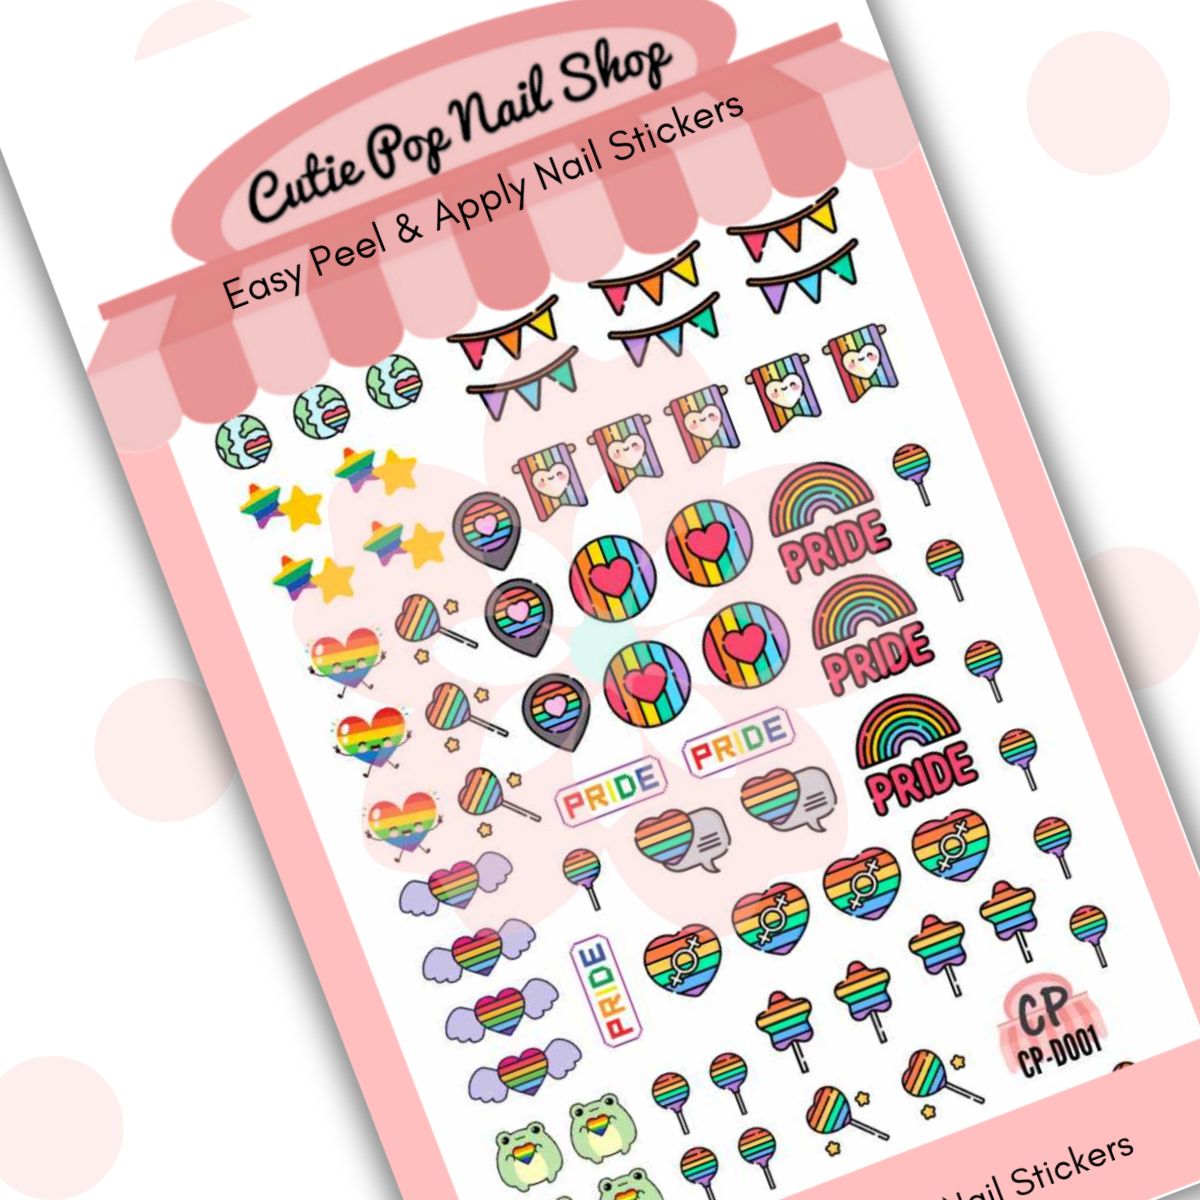 Cutie Pop Nail Shop’s Rainbow nail decals. The designs include rainbow hearts, rainbow stars, rainbow bunting, rainbow circles with hearts inside, rainbows with ‘Pride’ written beneath them, rainbow lollipops, cute frogs holding rainbow hearts, rainbow-colored Pride badges, a miniature Earth with a rainbow heart next to it, and a rainbow heart with wings.